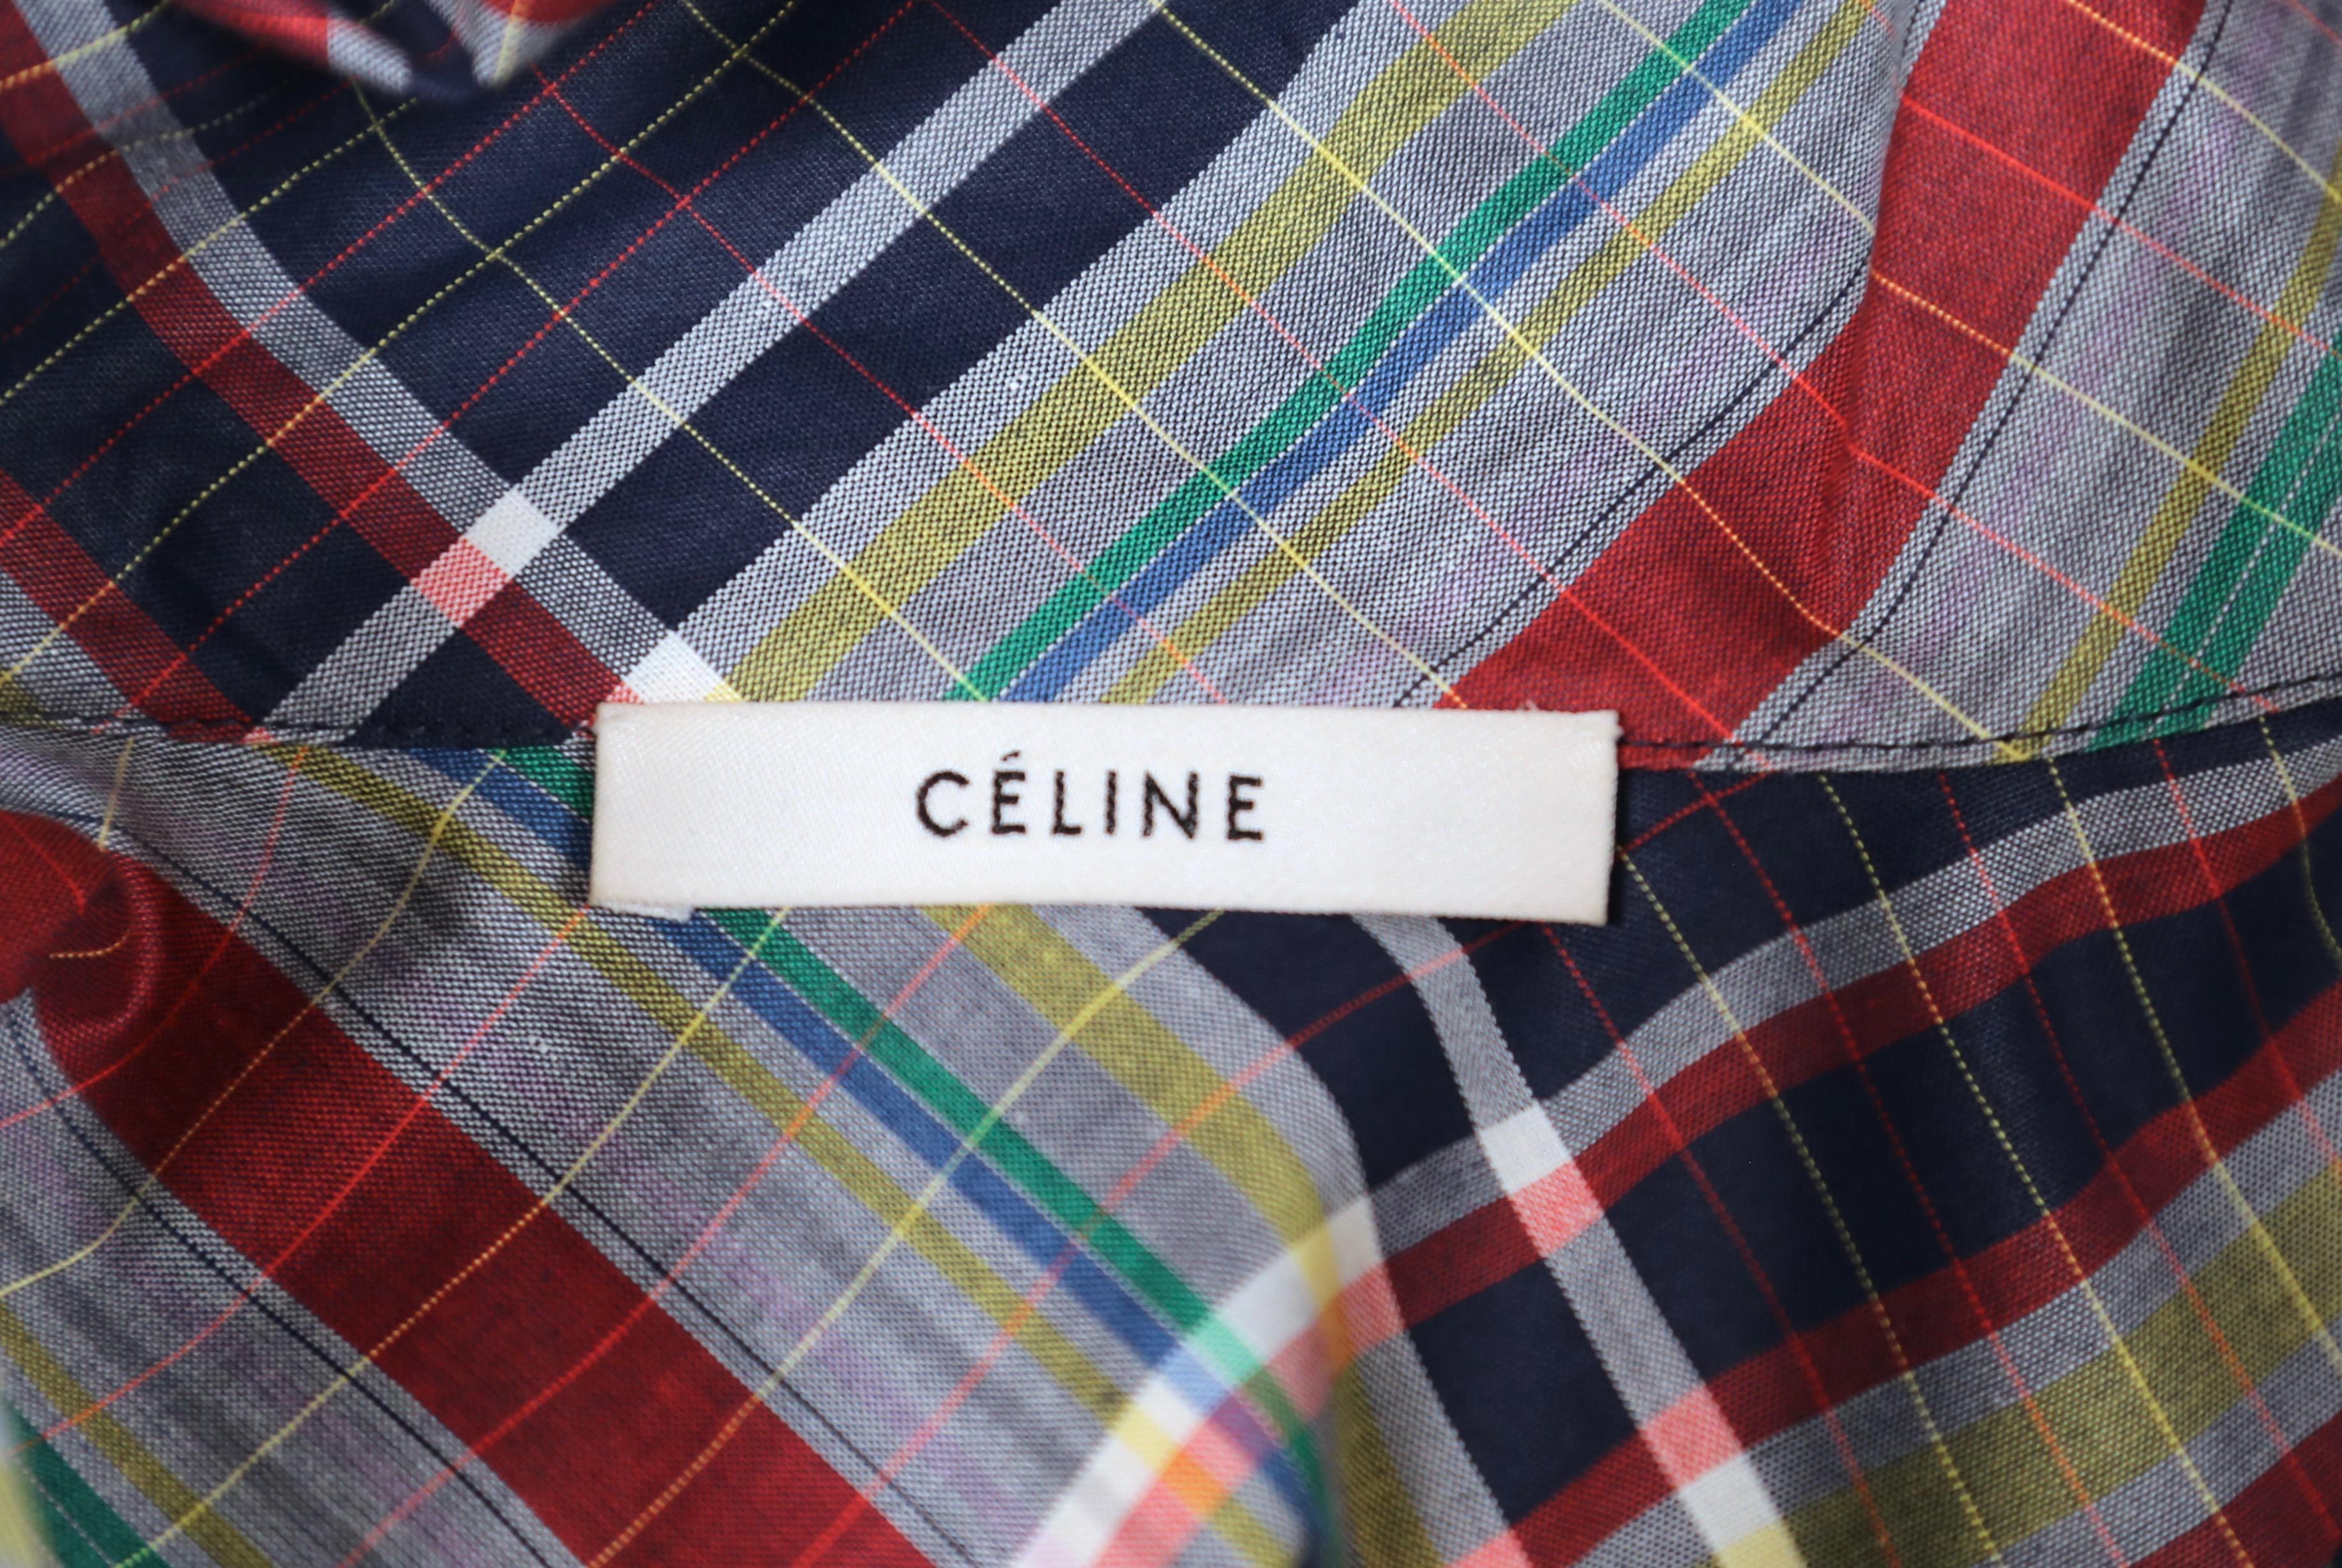 Black 2013 CELINE by PHOEBE PHILO plaid cotton runway shirt with draped neckline - new